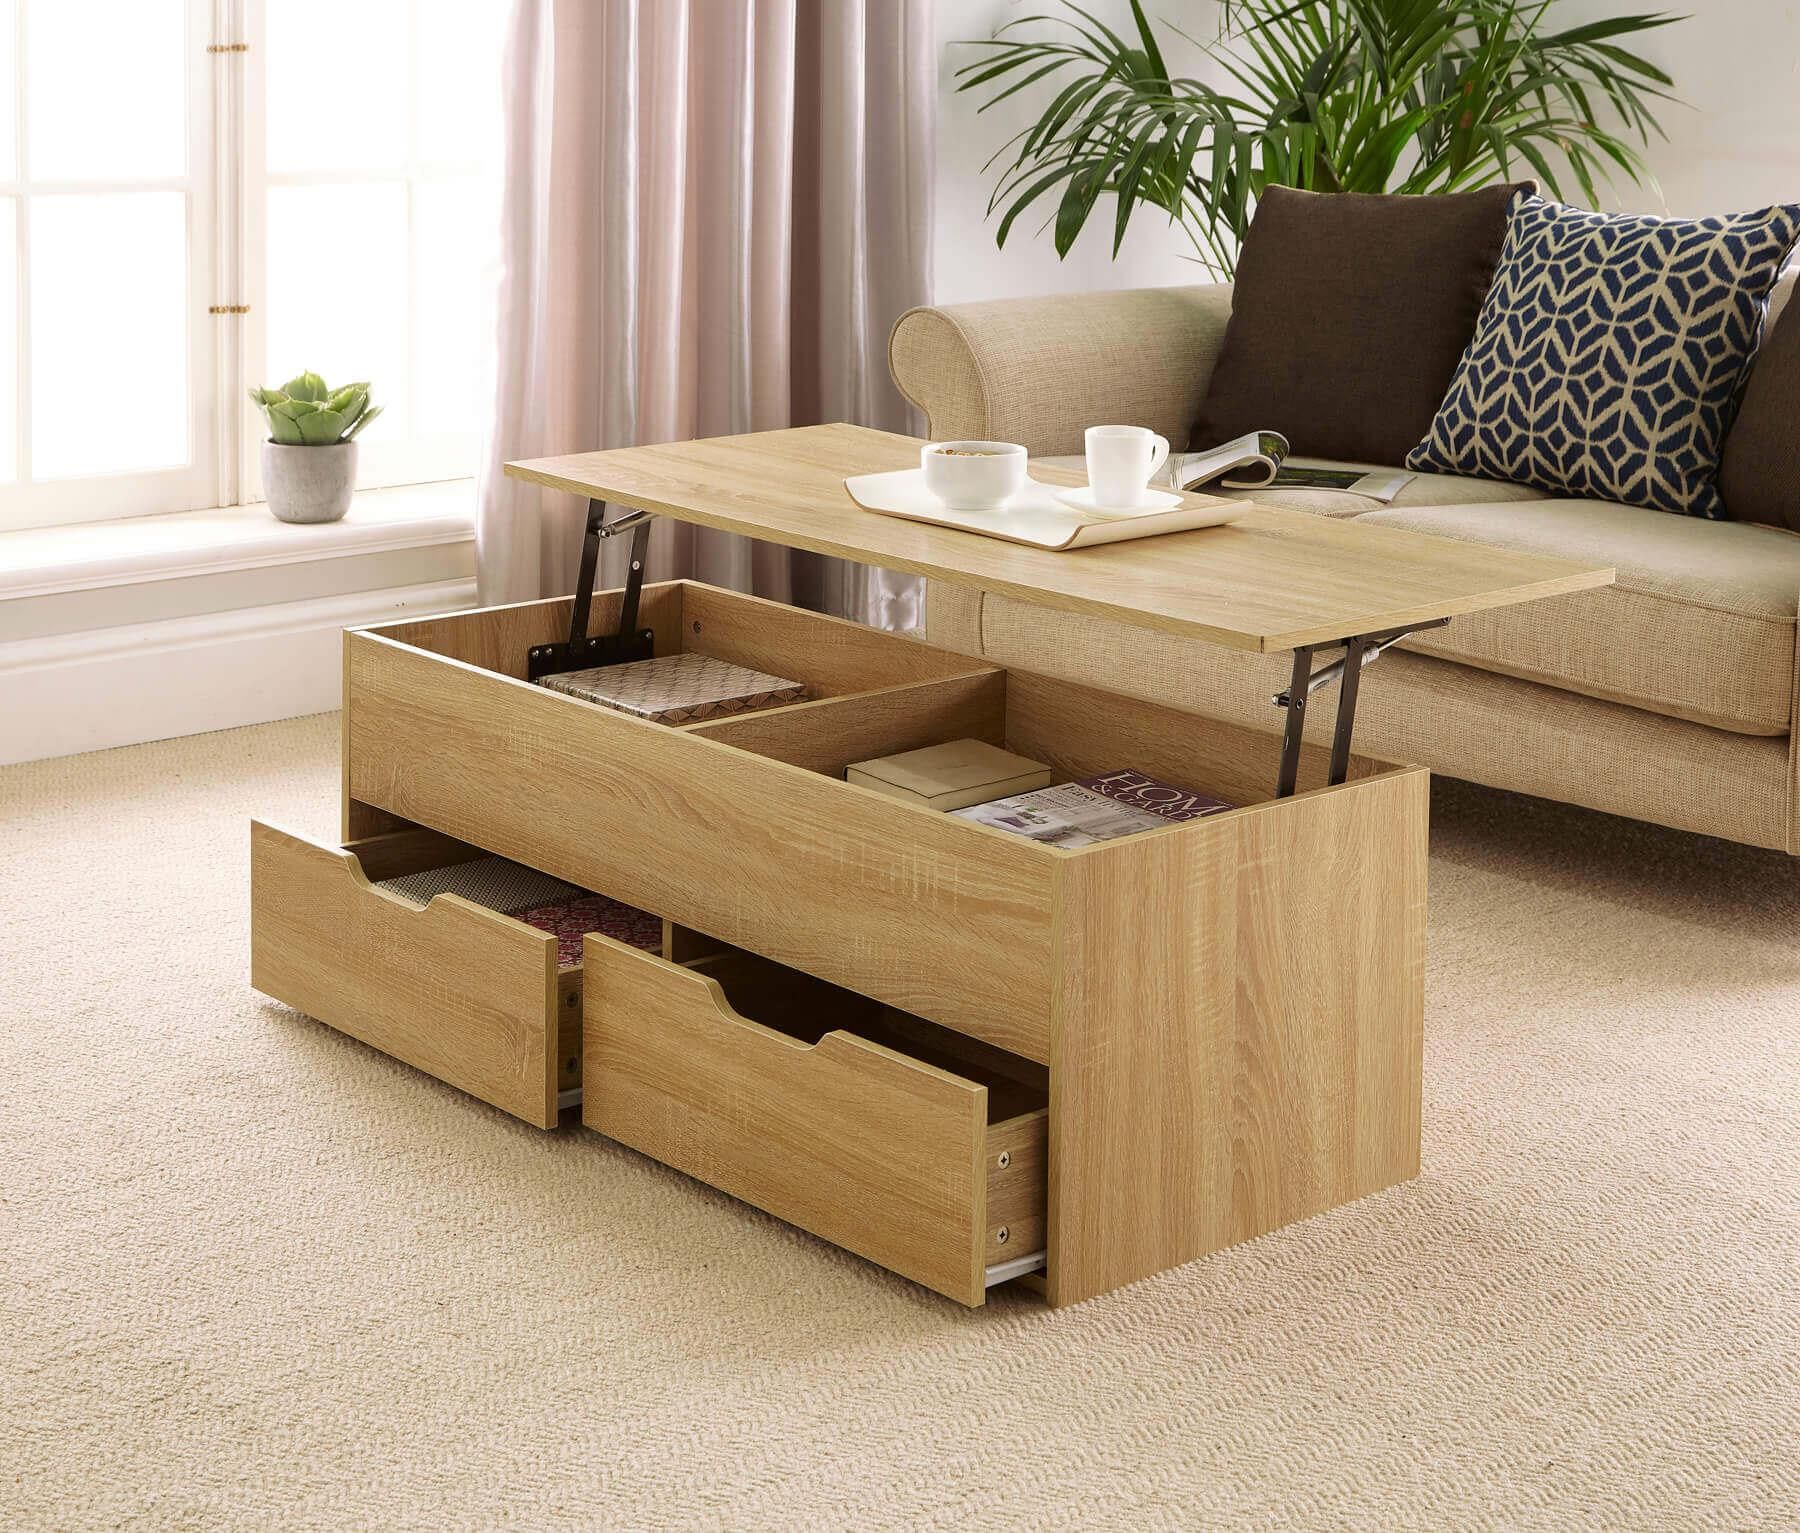 Oak Wooden Coffee Table With Lift Up Top And 2 Large Storage Drawers Pertaining To Wood Lift Top Coffee Tables (View 20 of 20)